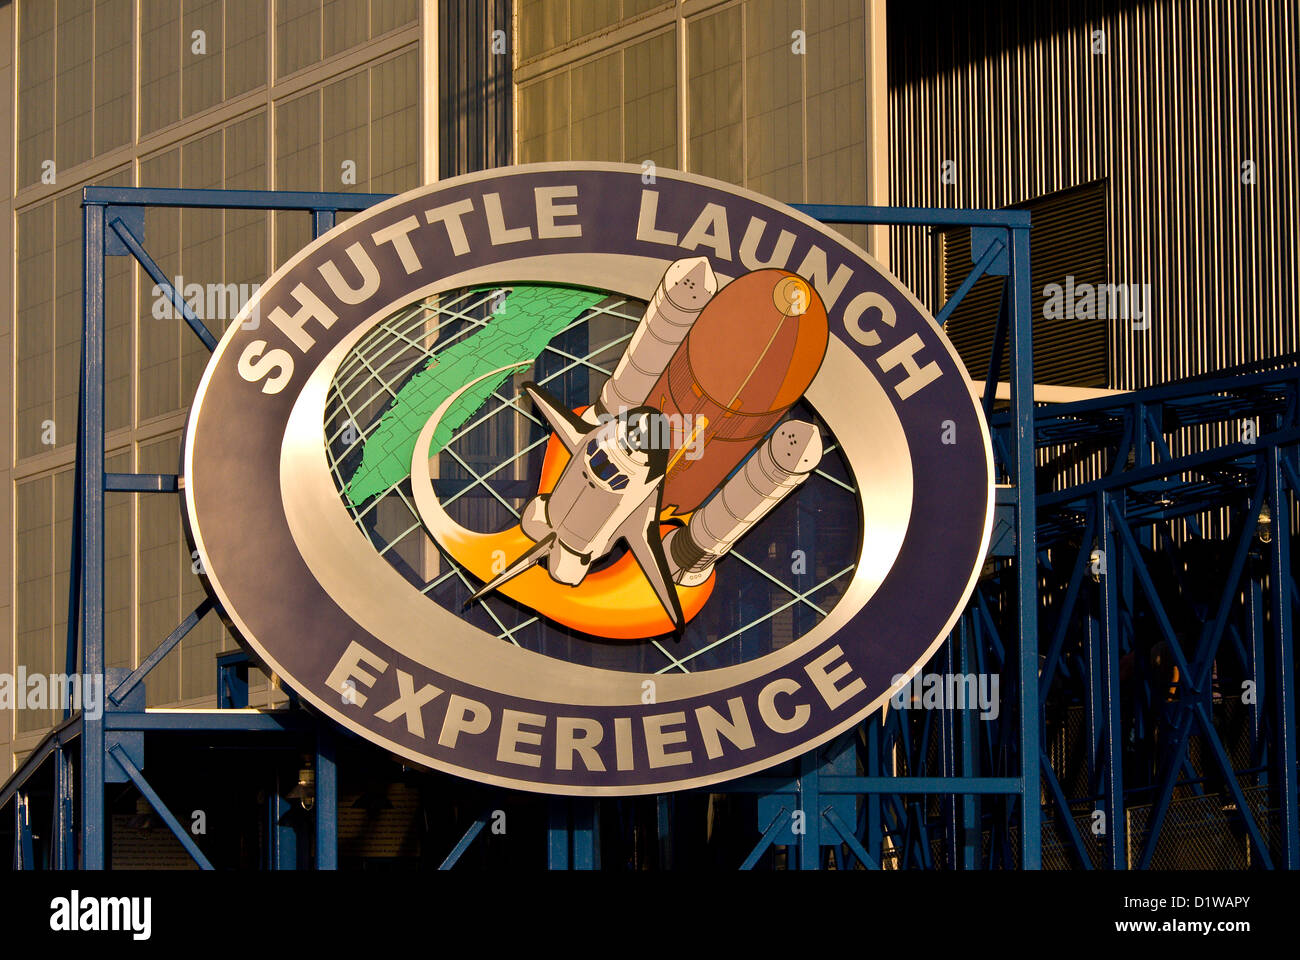 Shuttle Launch Experience attraction sign Kennedy Space Center Visitor Center, Florida Stock Photo